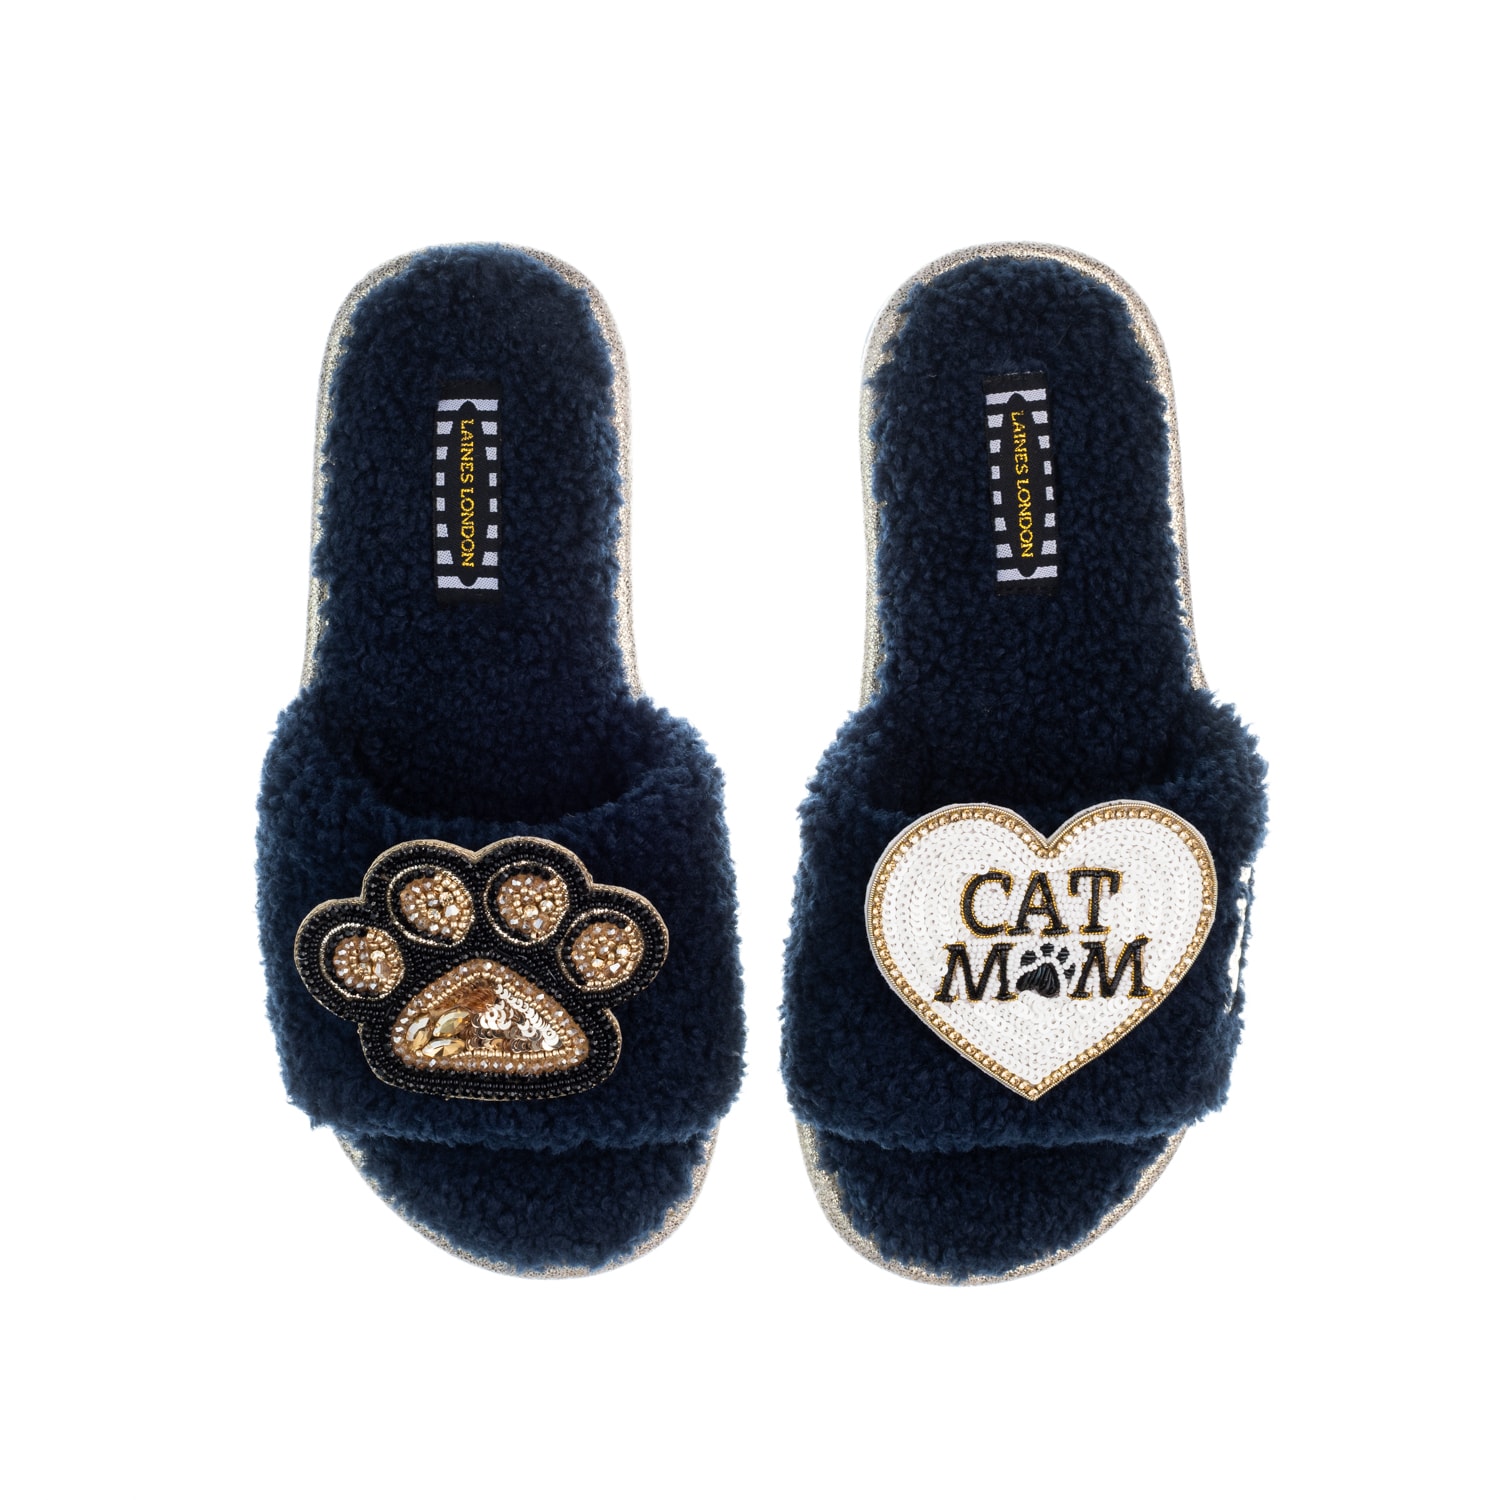 Laines London Women's Blue Teddy Toweling Slippers With Paw & Cat Mom / Mum Brooches - Navy